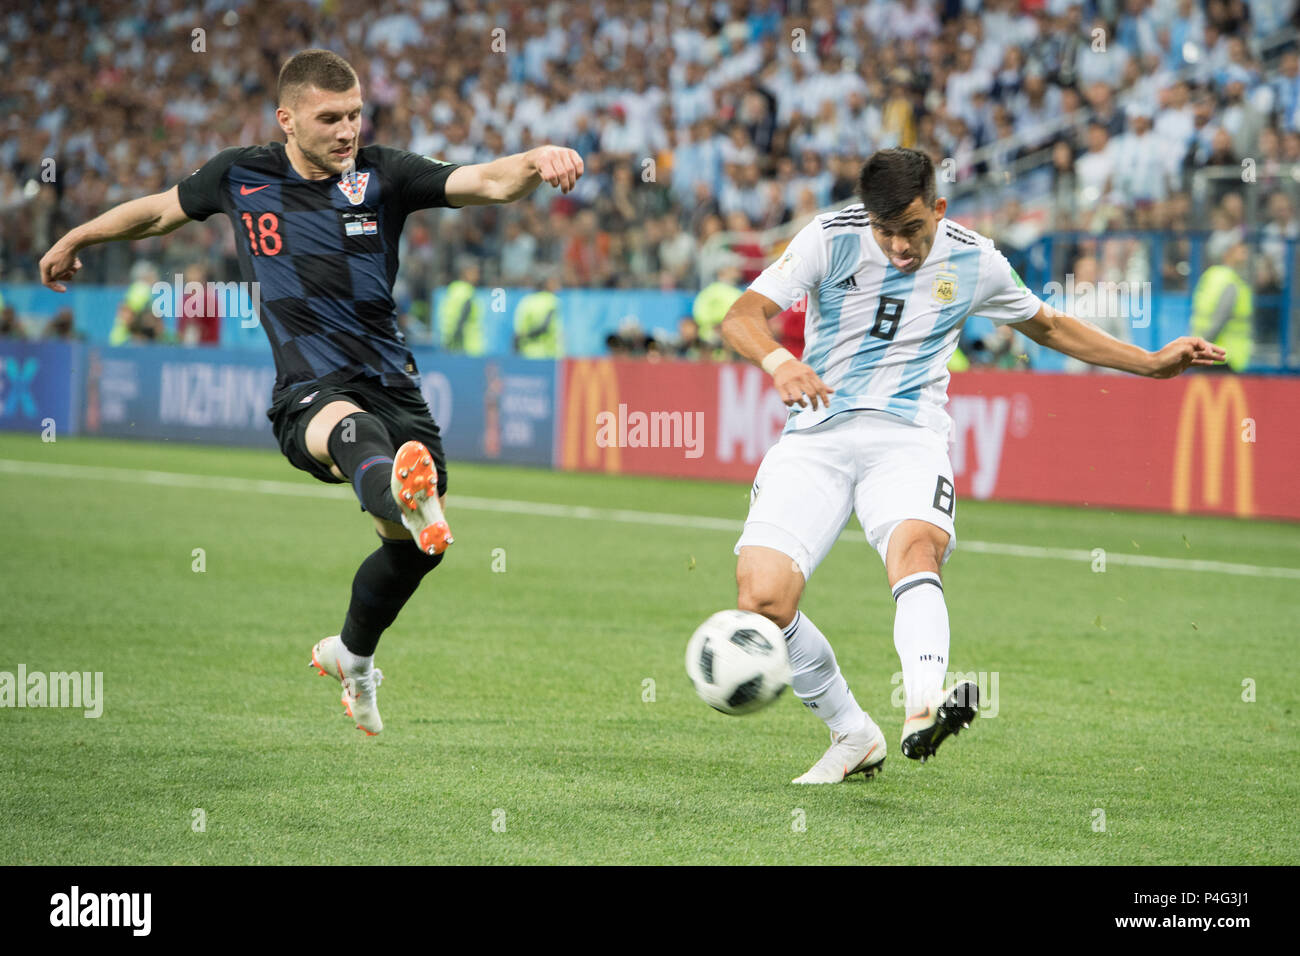 Ante REBIC (left, CRO) versus Marcos ACUNA (ARG), action, duels, Argentina (ARG) - Croatia (CRO) 0: 3, preliminary round, Group D, match 23, on 21.06.2018 in Moscow; Football World Cup 2018 in Russia from 14.06. - 15.07.2018. | usage worldwide Credit: dpa picture alliance/Alamy Live News Stock Photo